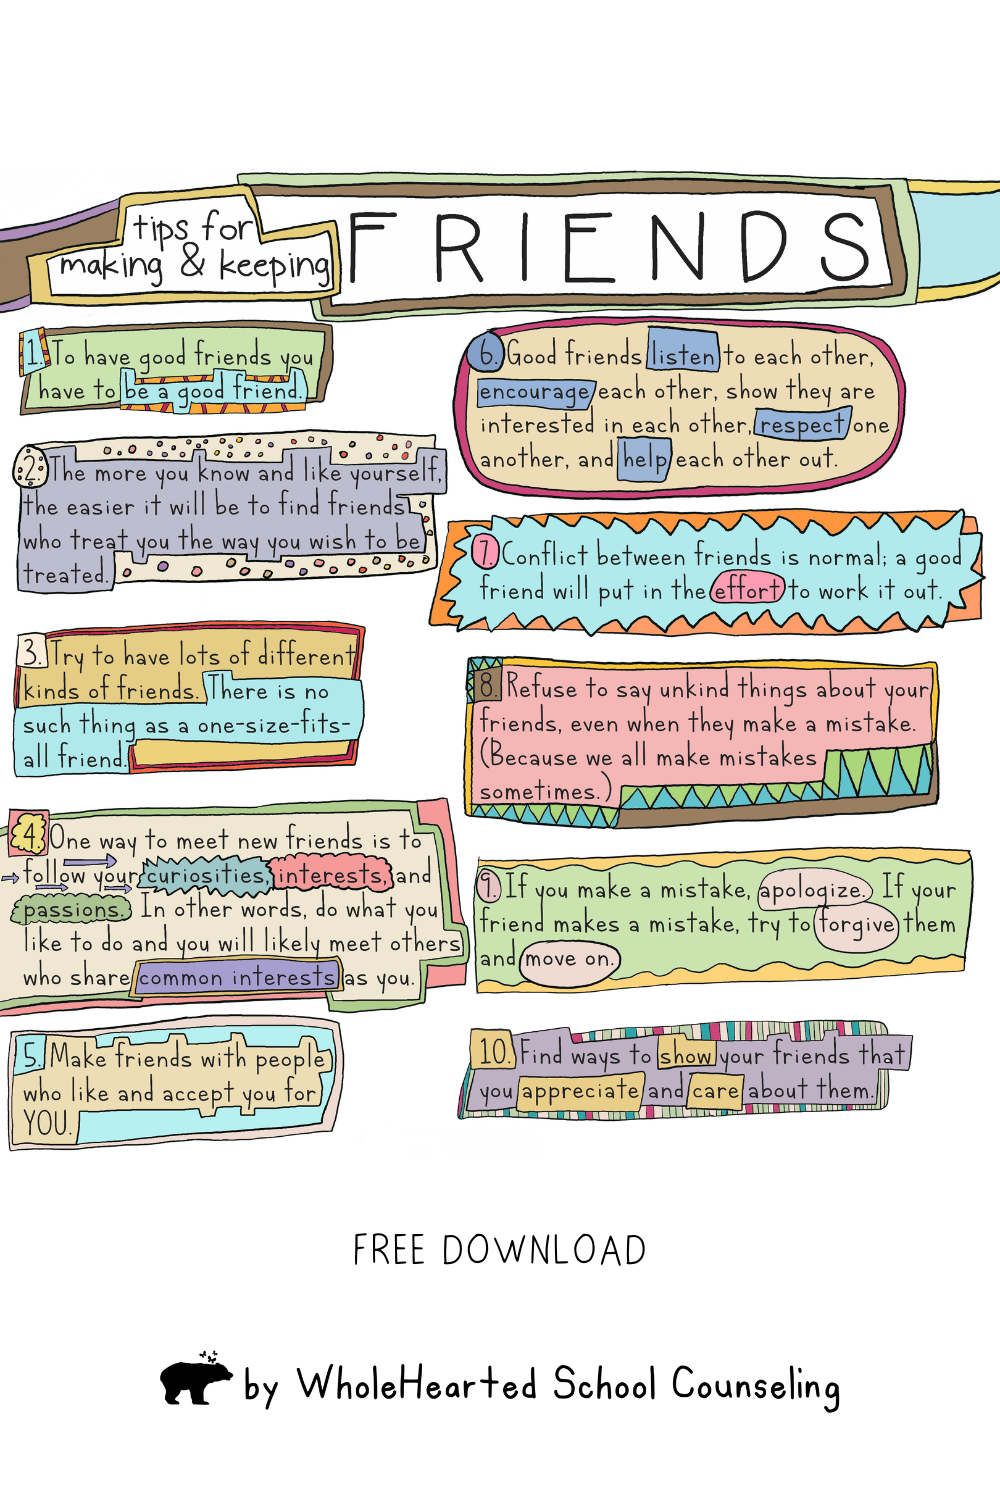 List of 10 ways kids can make and keep friends.